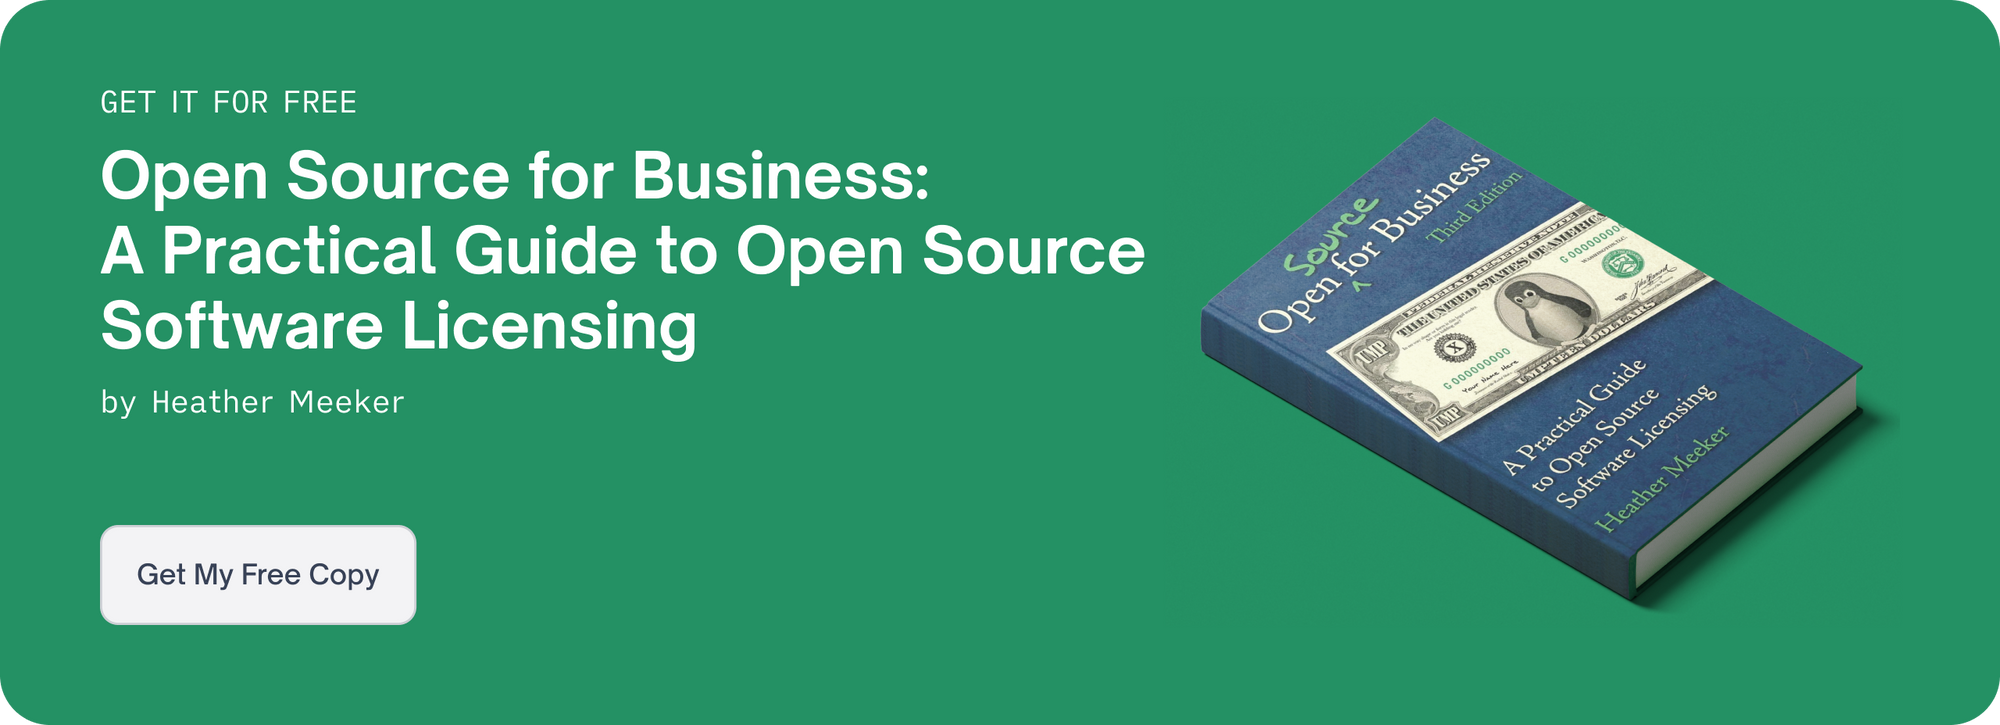 Business Source License (BSL 1.1): Requirements, Provisions, and History